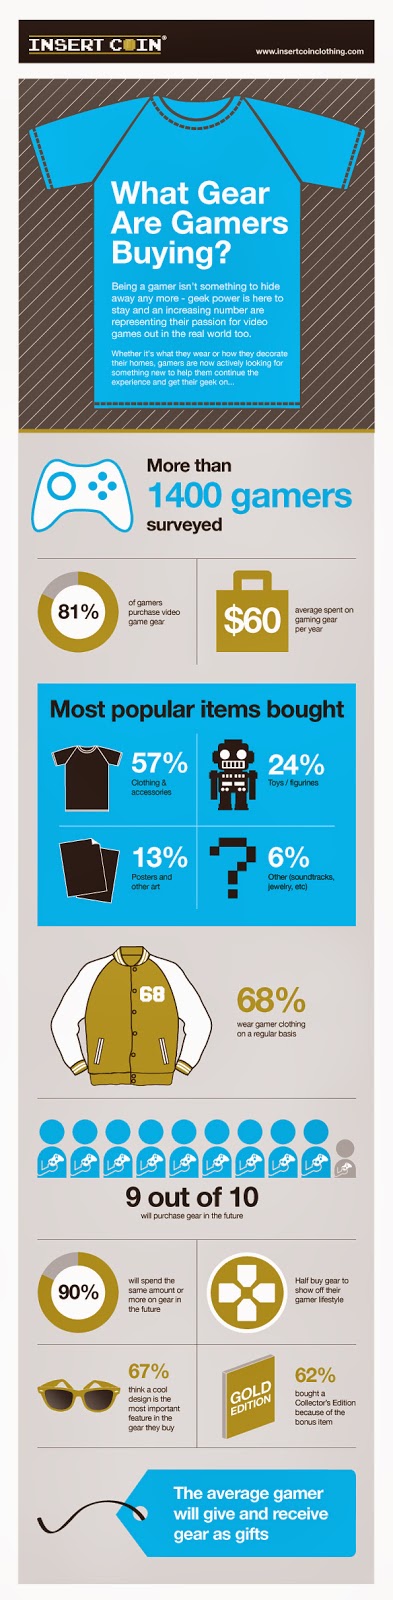 Insert Coin Clothing Releases New Infographic That Details The Gear ...